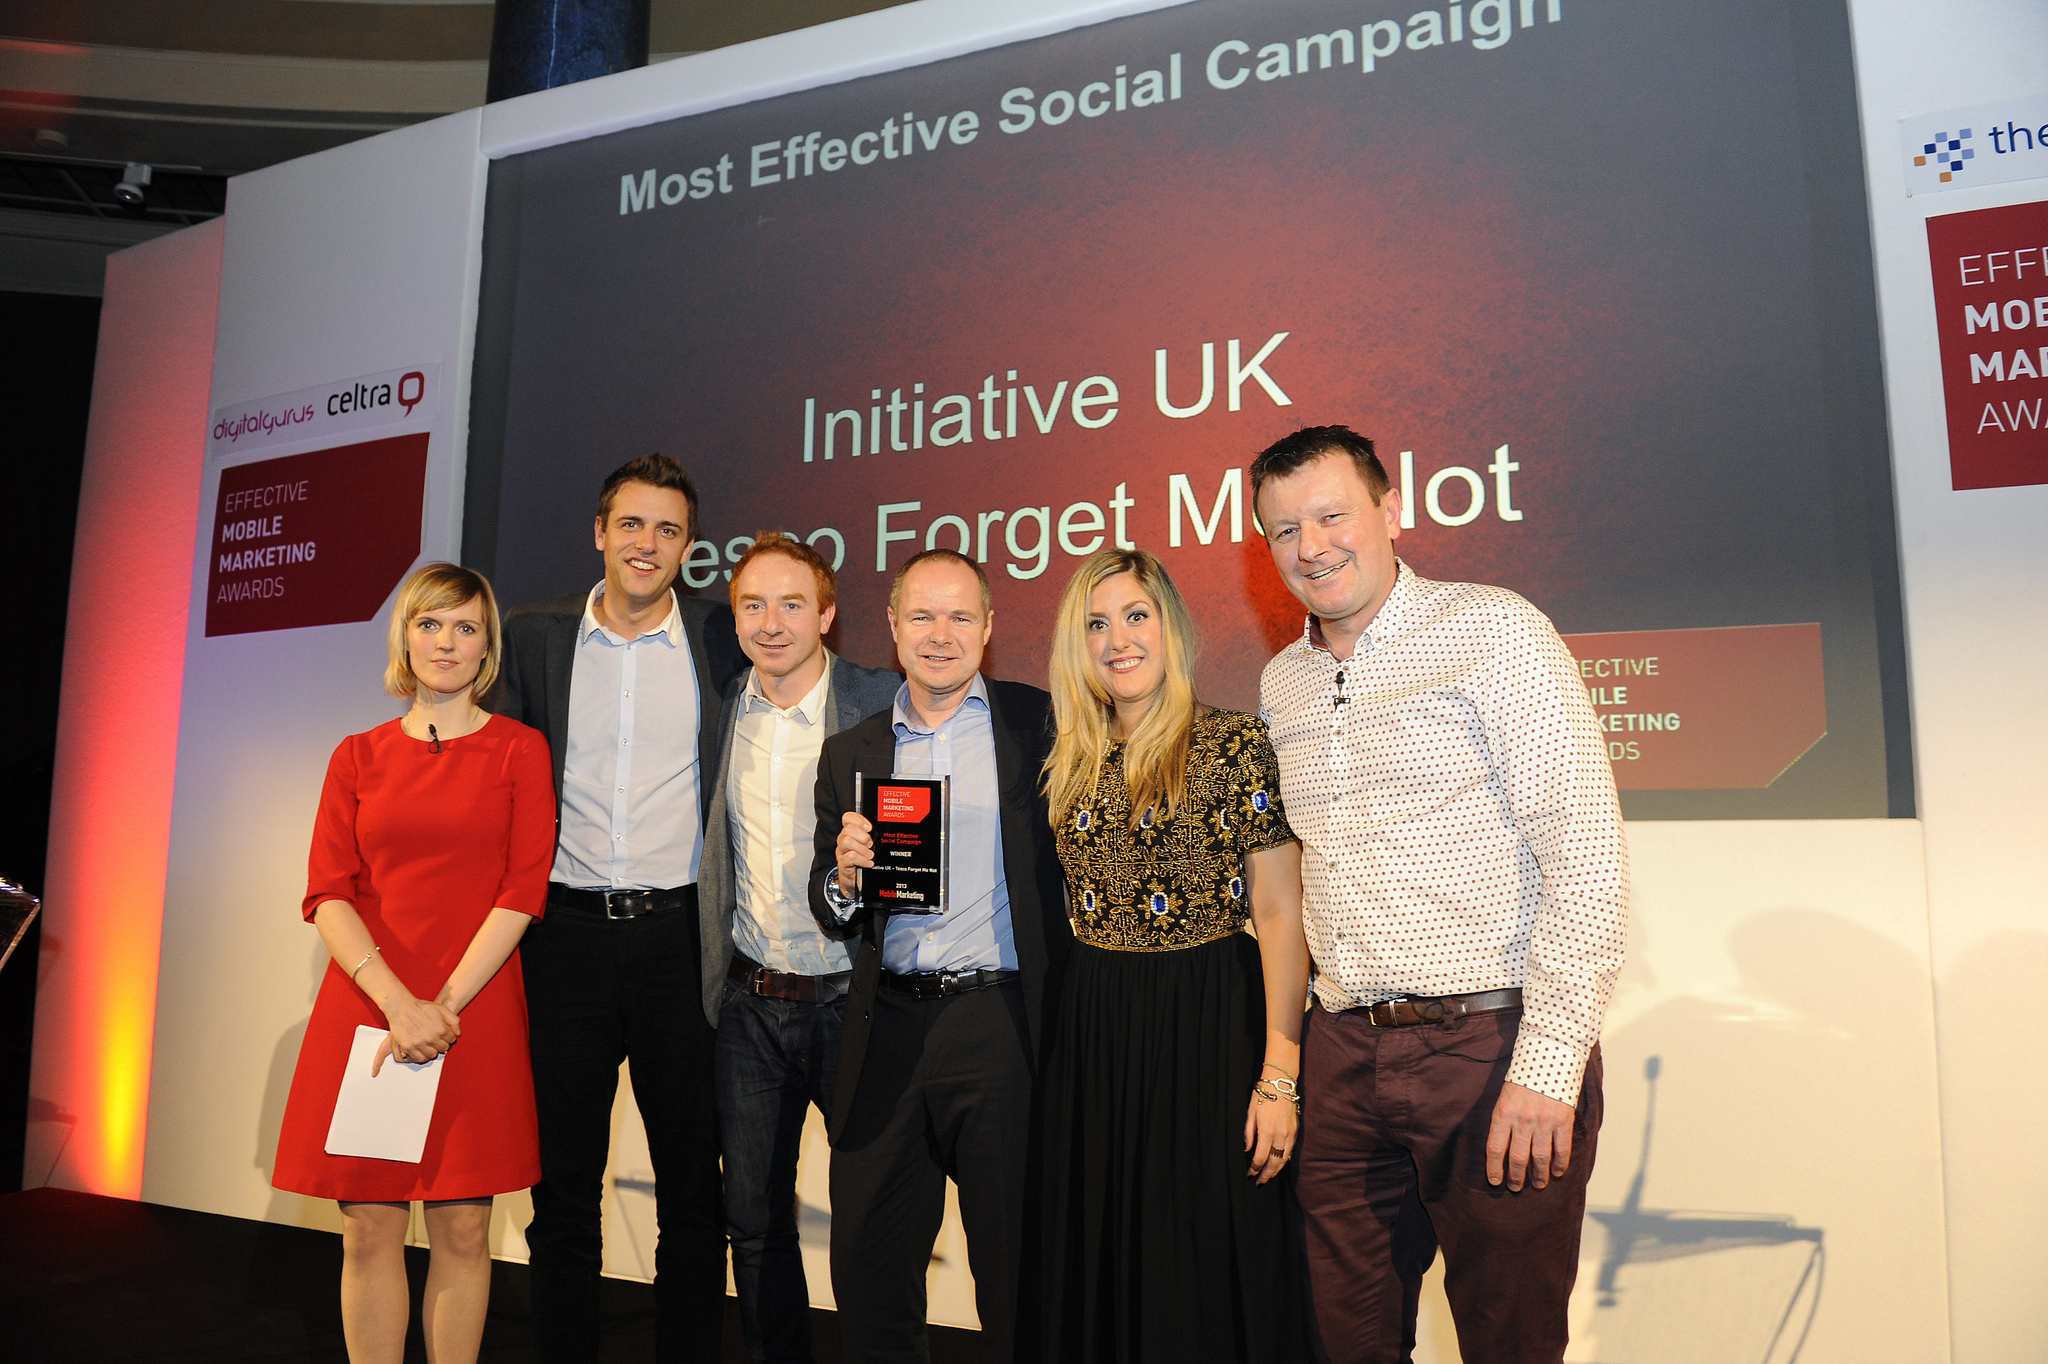 Effective Mobile Marketing Awards – Last Year's Winners: Social Campaign